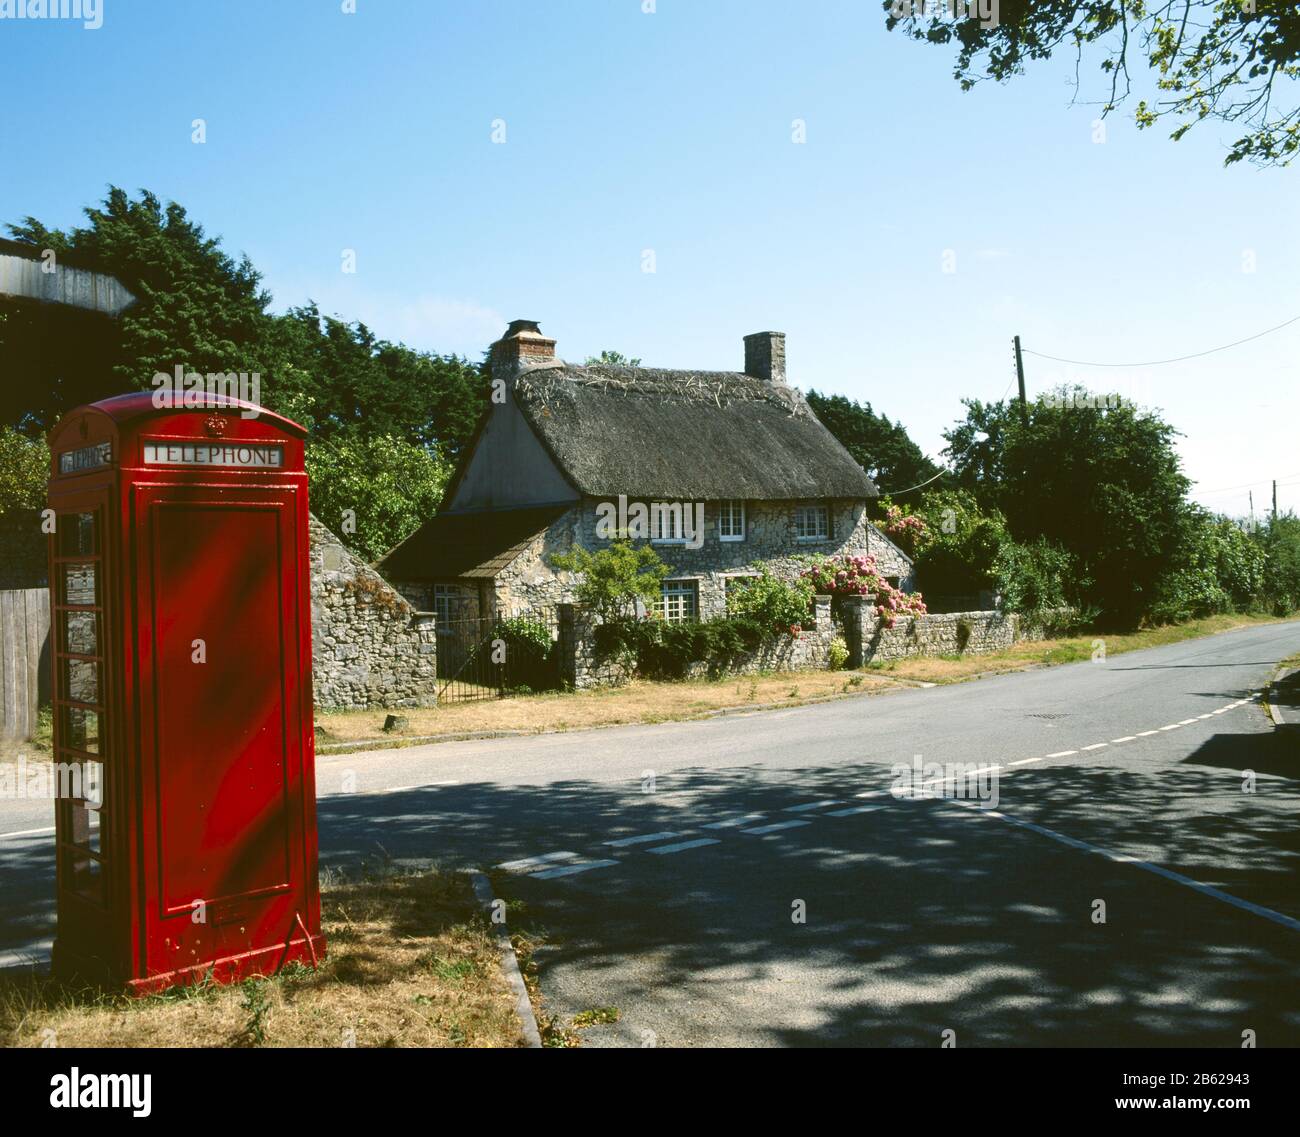 Reetched Cottage and Red Phone box, Gileston, Vale of glamorgan, South wales. Stockfoto